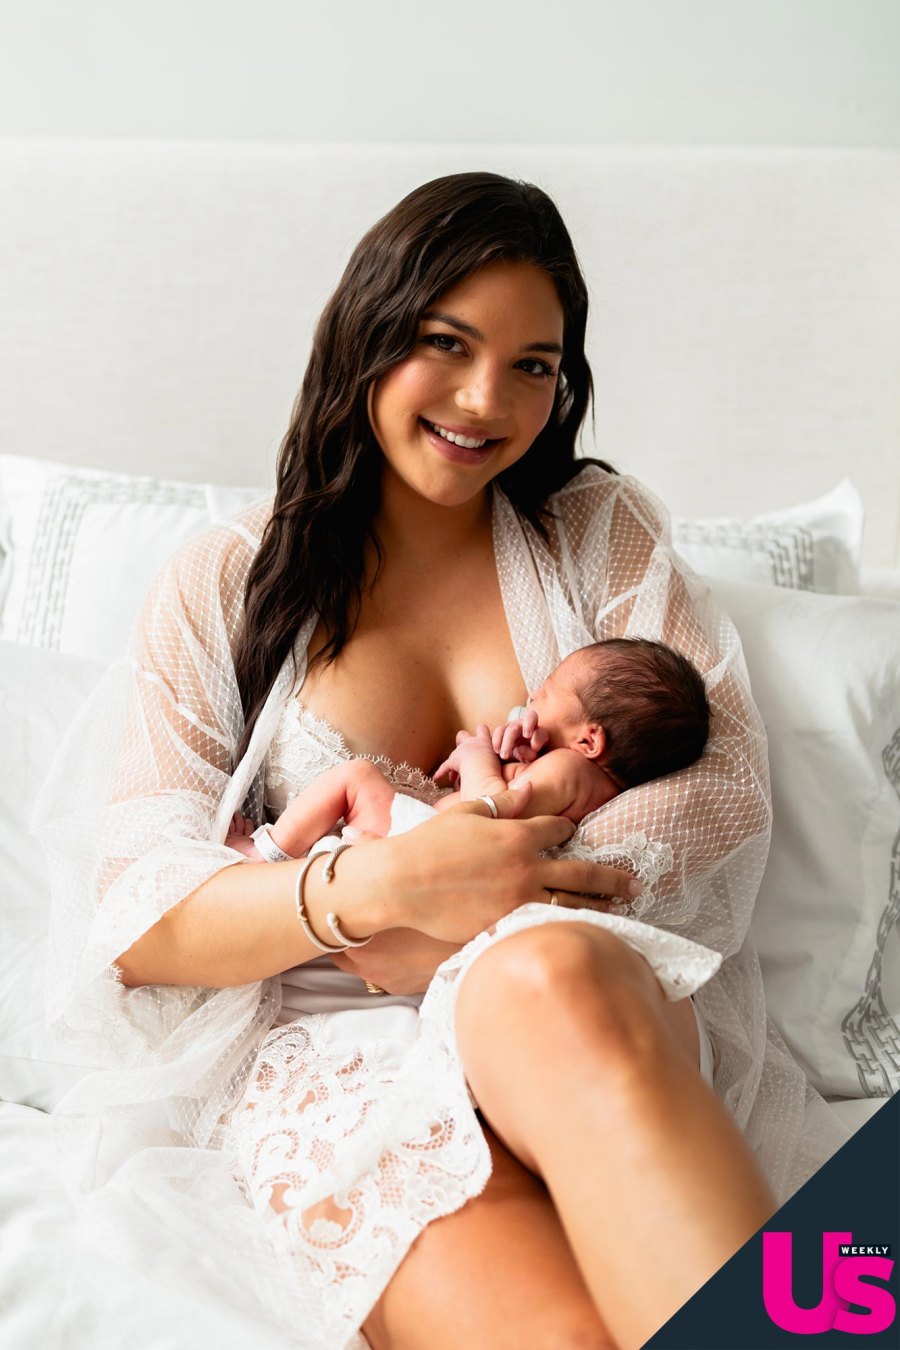 'Love Is Blind' Alum Giannina Gibelli Gives Birth, Welcomes 1st Baby With Blake Horstmann MS